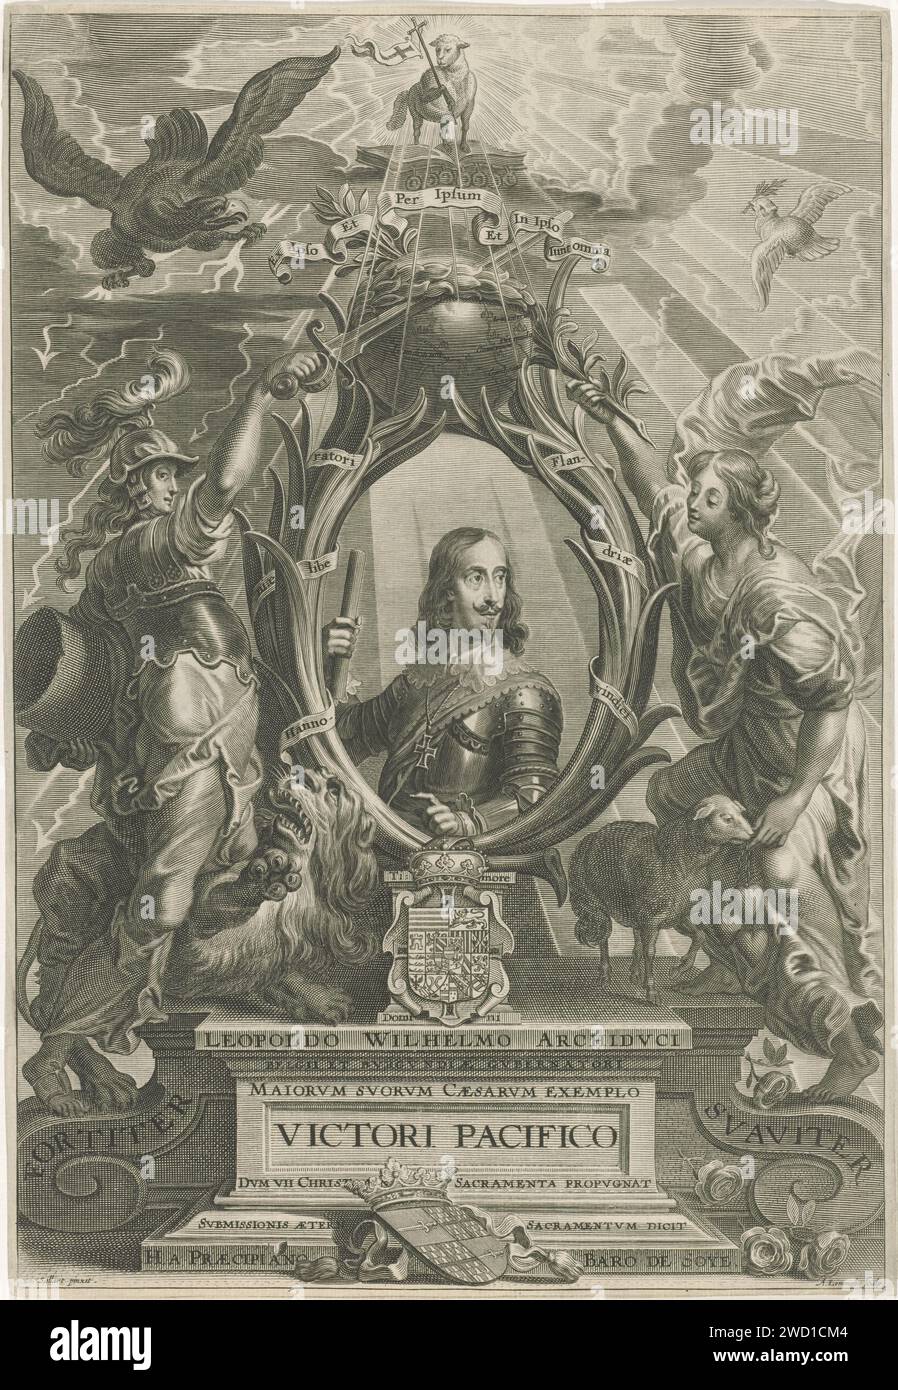 Portrait of Leopold Willem, Archduke of Austria, Adriaen Lommelin, after Antoine Sallaert, 1630 - 1677 print Portrait of Leopold Willem, Archduke of Austria, governor of the Spanish Netherlands. The portrait is flanked by the personalized force (left) and meekness (right). Under the portrait the crowned coat of arms of the portrayed person. The Lamb of God has appeared at the top of the sky. Antwerp paper engraving Fortitude, 'Fortitudo'  one of the Four Cardinal Virtues. Meekness; 'Mansuetudine' (Ripa). lamb bearing cross or banner, 'Agnus Dei'  symbol of Christ Stock Photo